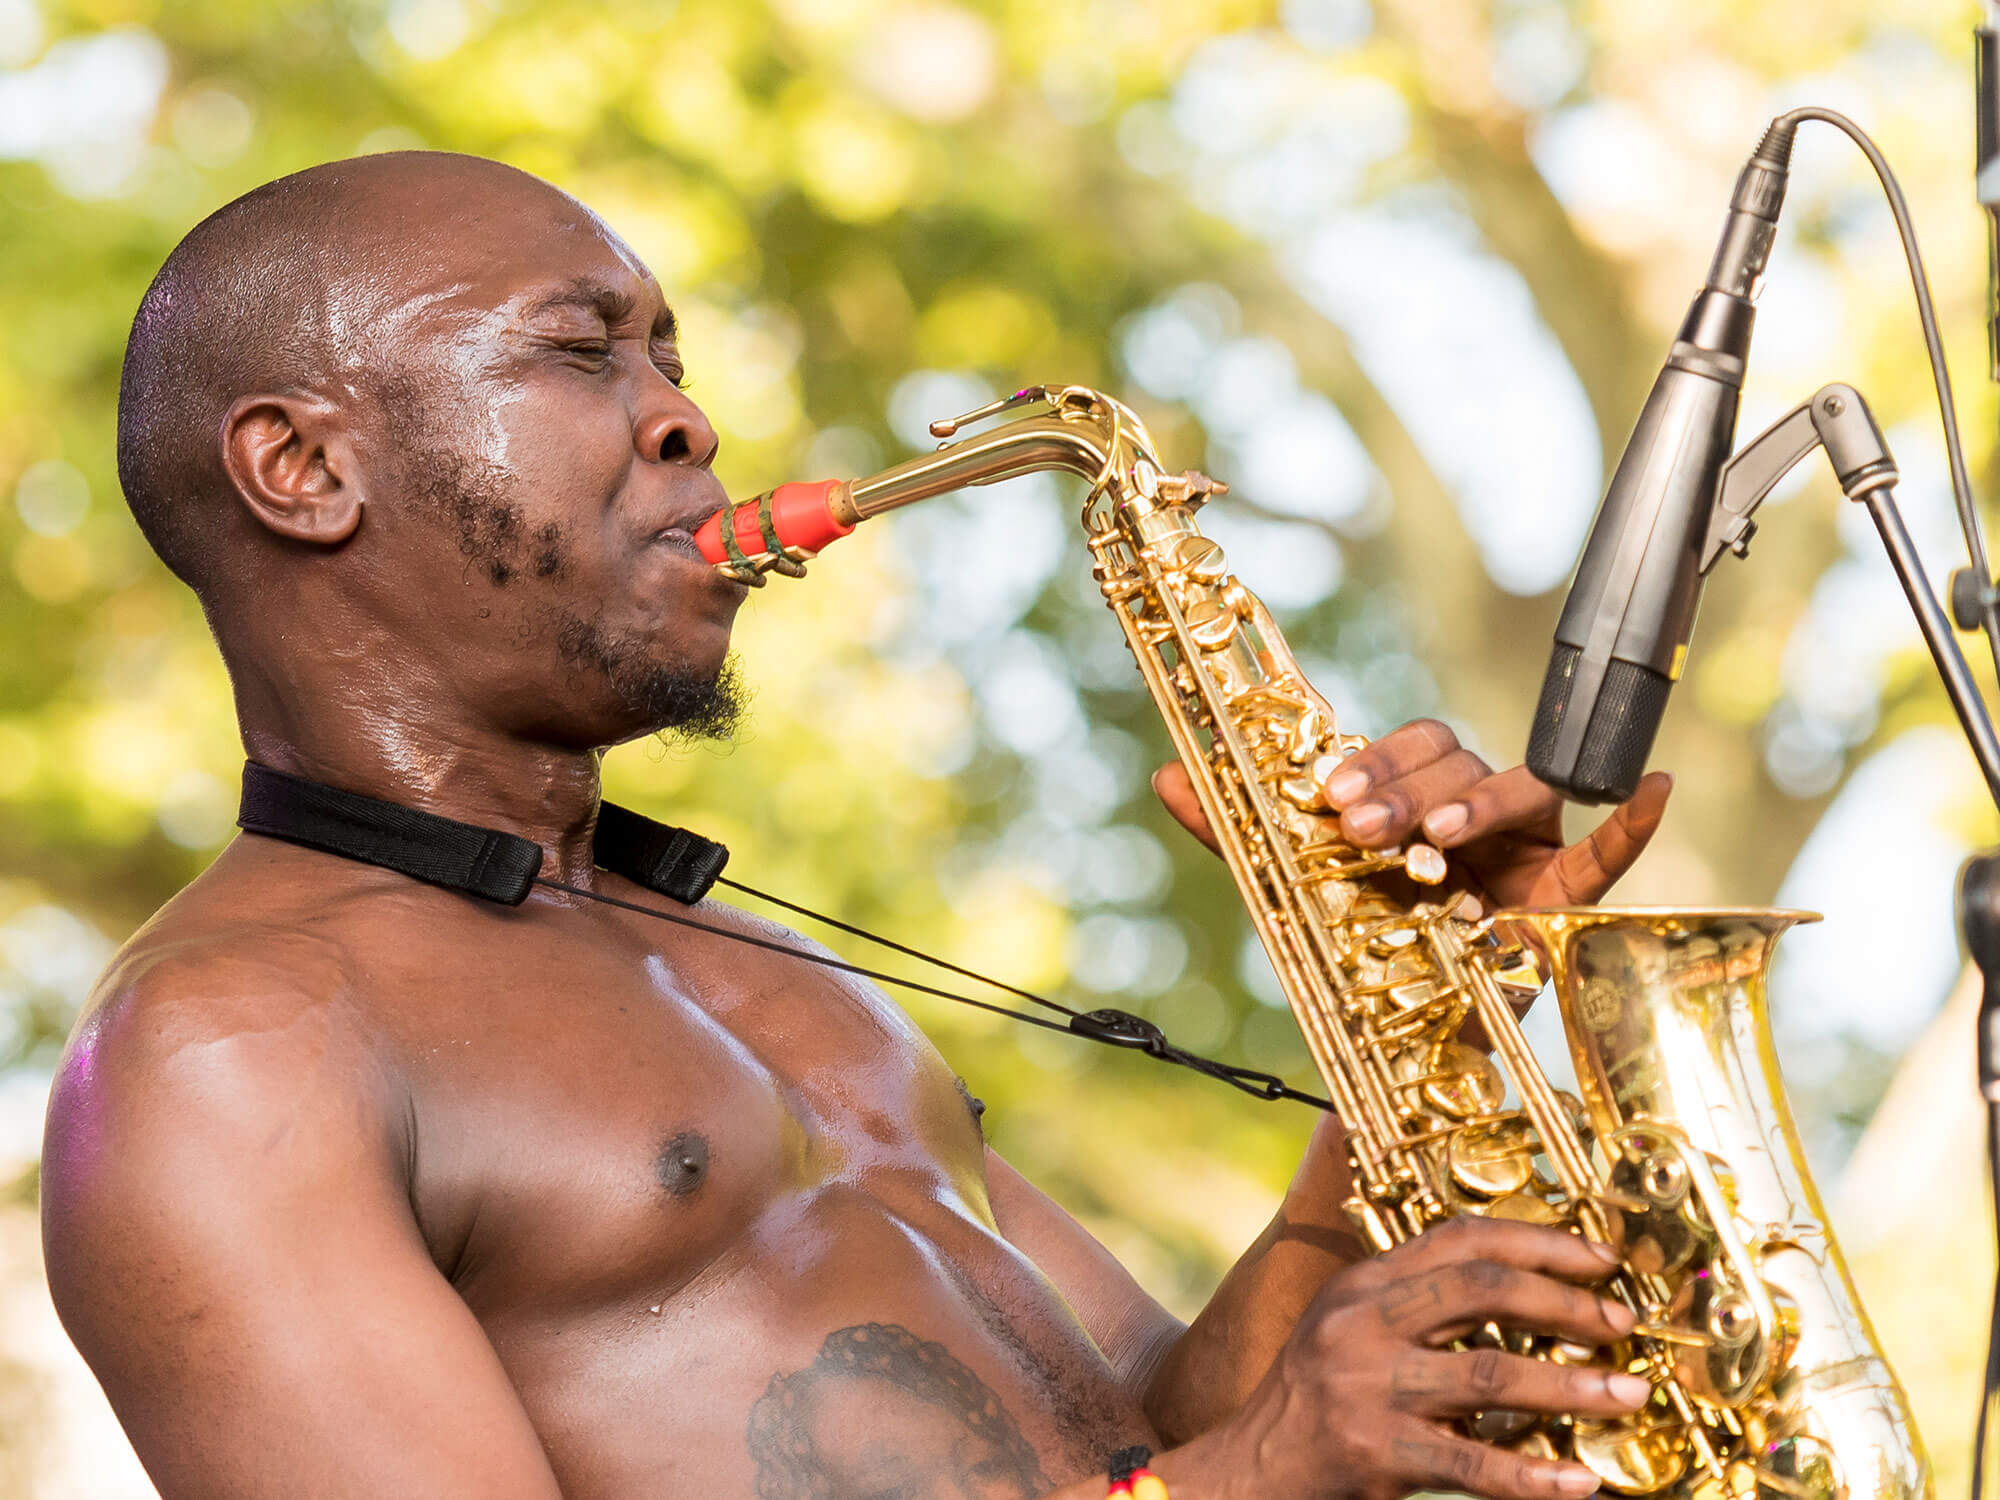 Nigerian musician Seun Kuti (born Oluseun Anikulapo Kuti) plays alto saxophone as he leads his group Egypt 80 during a performance at Central Park SummerStage, New York, New York, July 16, 2017. The concert was a tribute to Kuti's father and the original leader of Egypt 80, Afrobeat pioneer Fela Anikulapo-Kuti. 